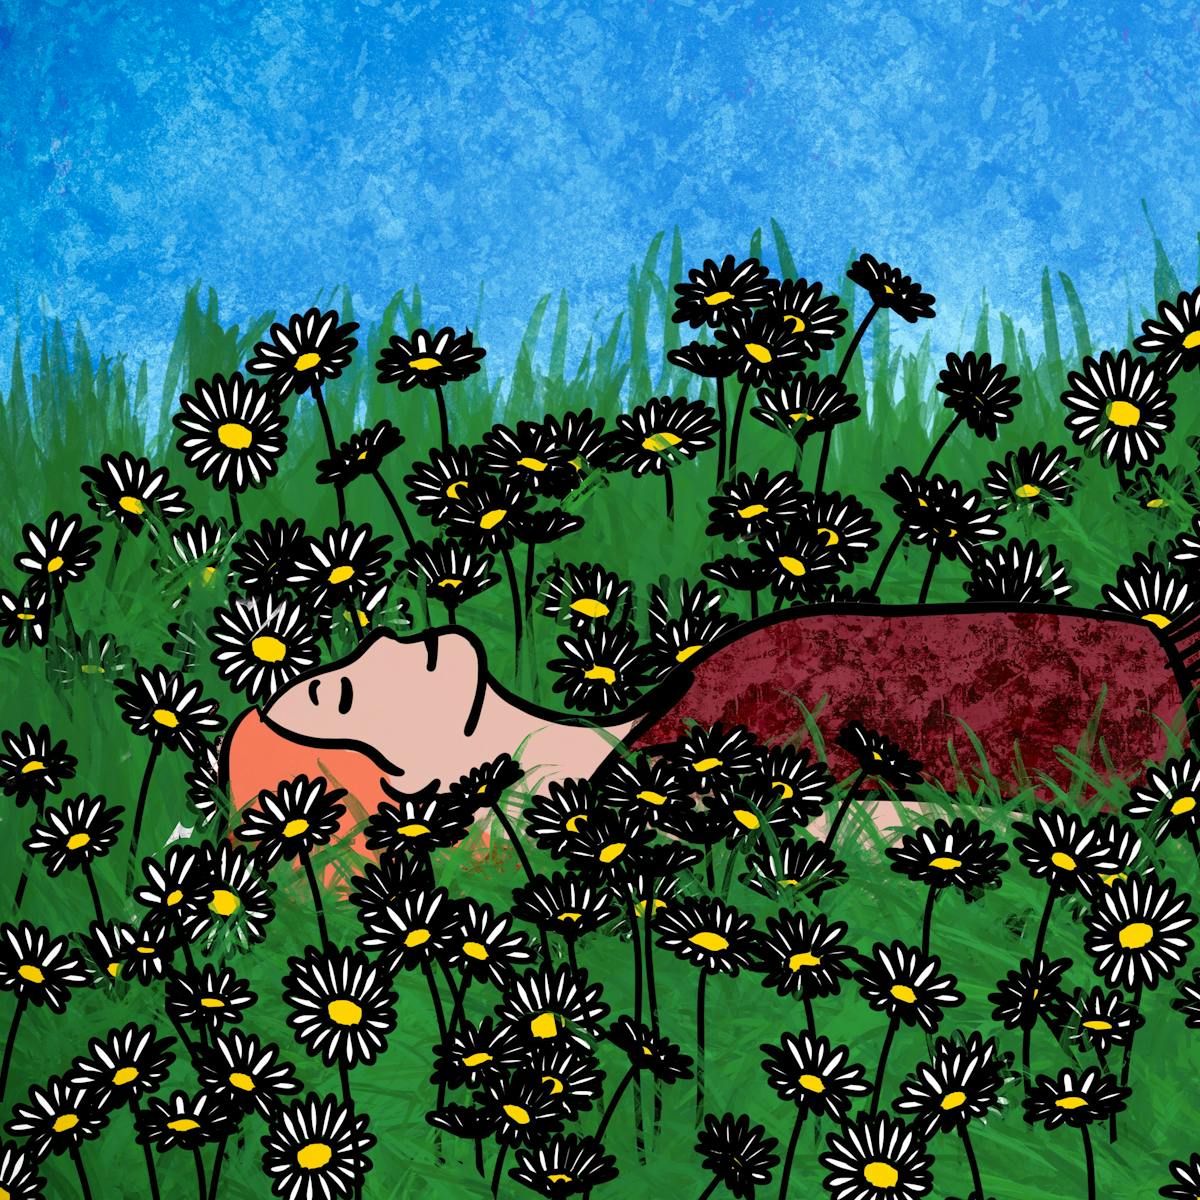 Colourful digital artwork showing a woman lying on her back in a green grassy field with large daisy like flowers. She is wearing a maroon dress and has her eyes closed. Her mouth is curved into a contented smile. Above her is a mottled blue sky. There is a sense of peace and harmony.